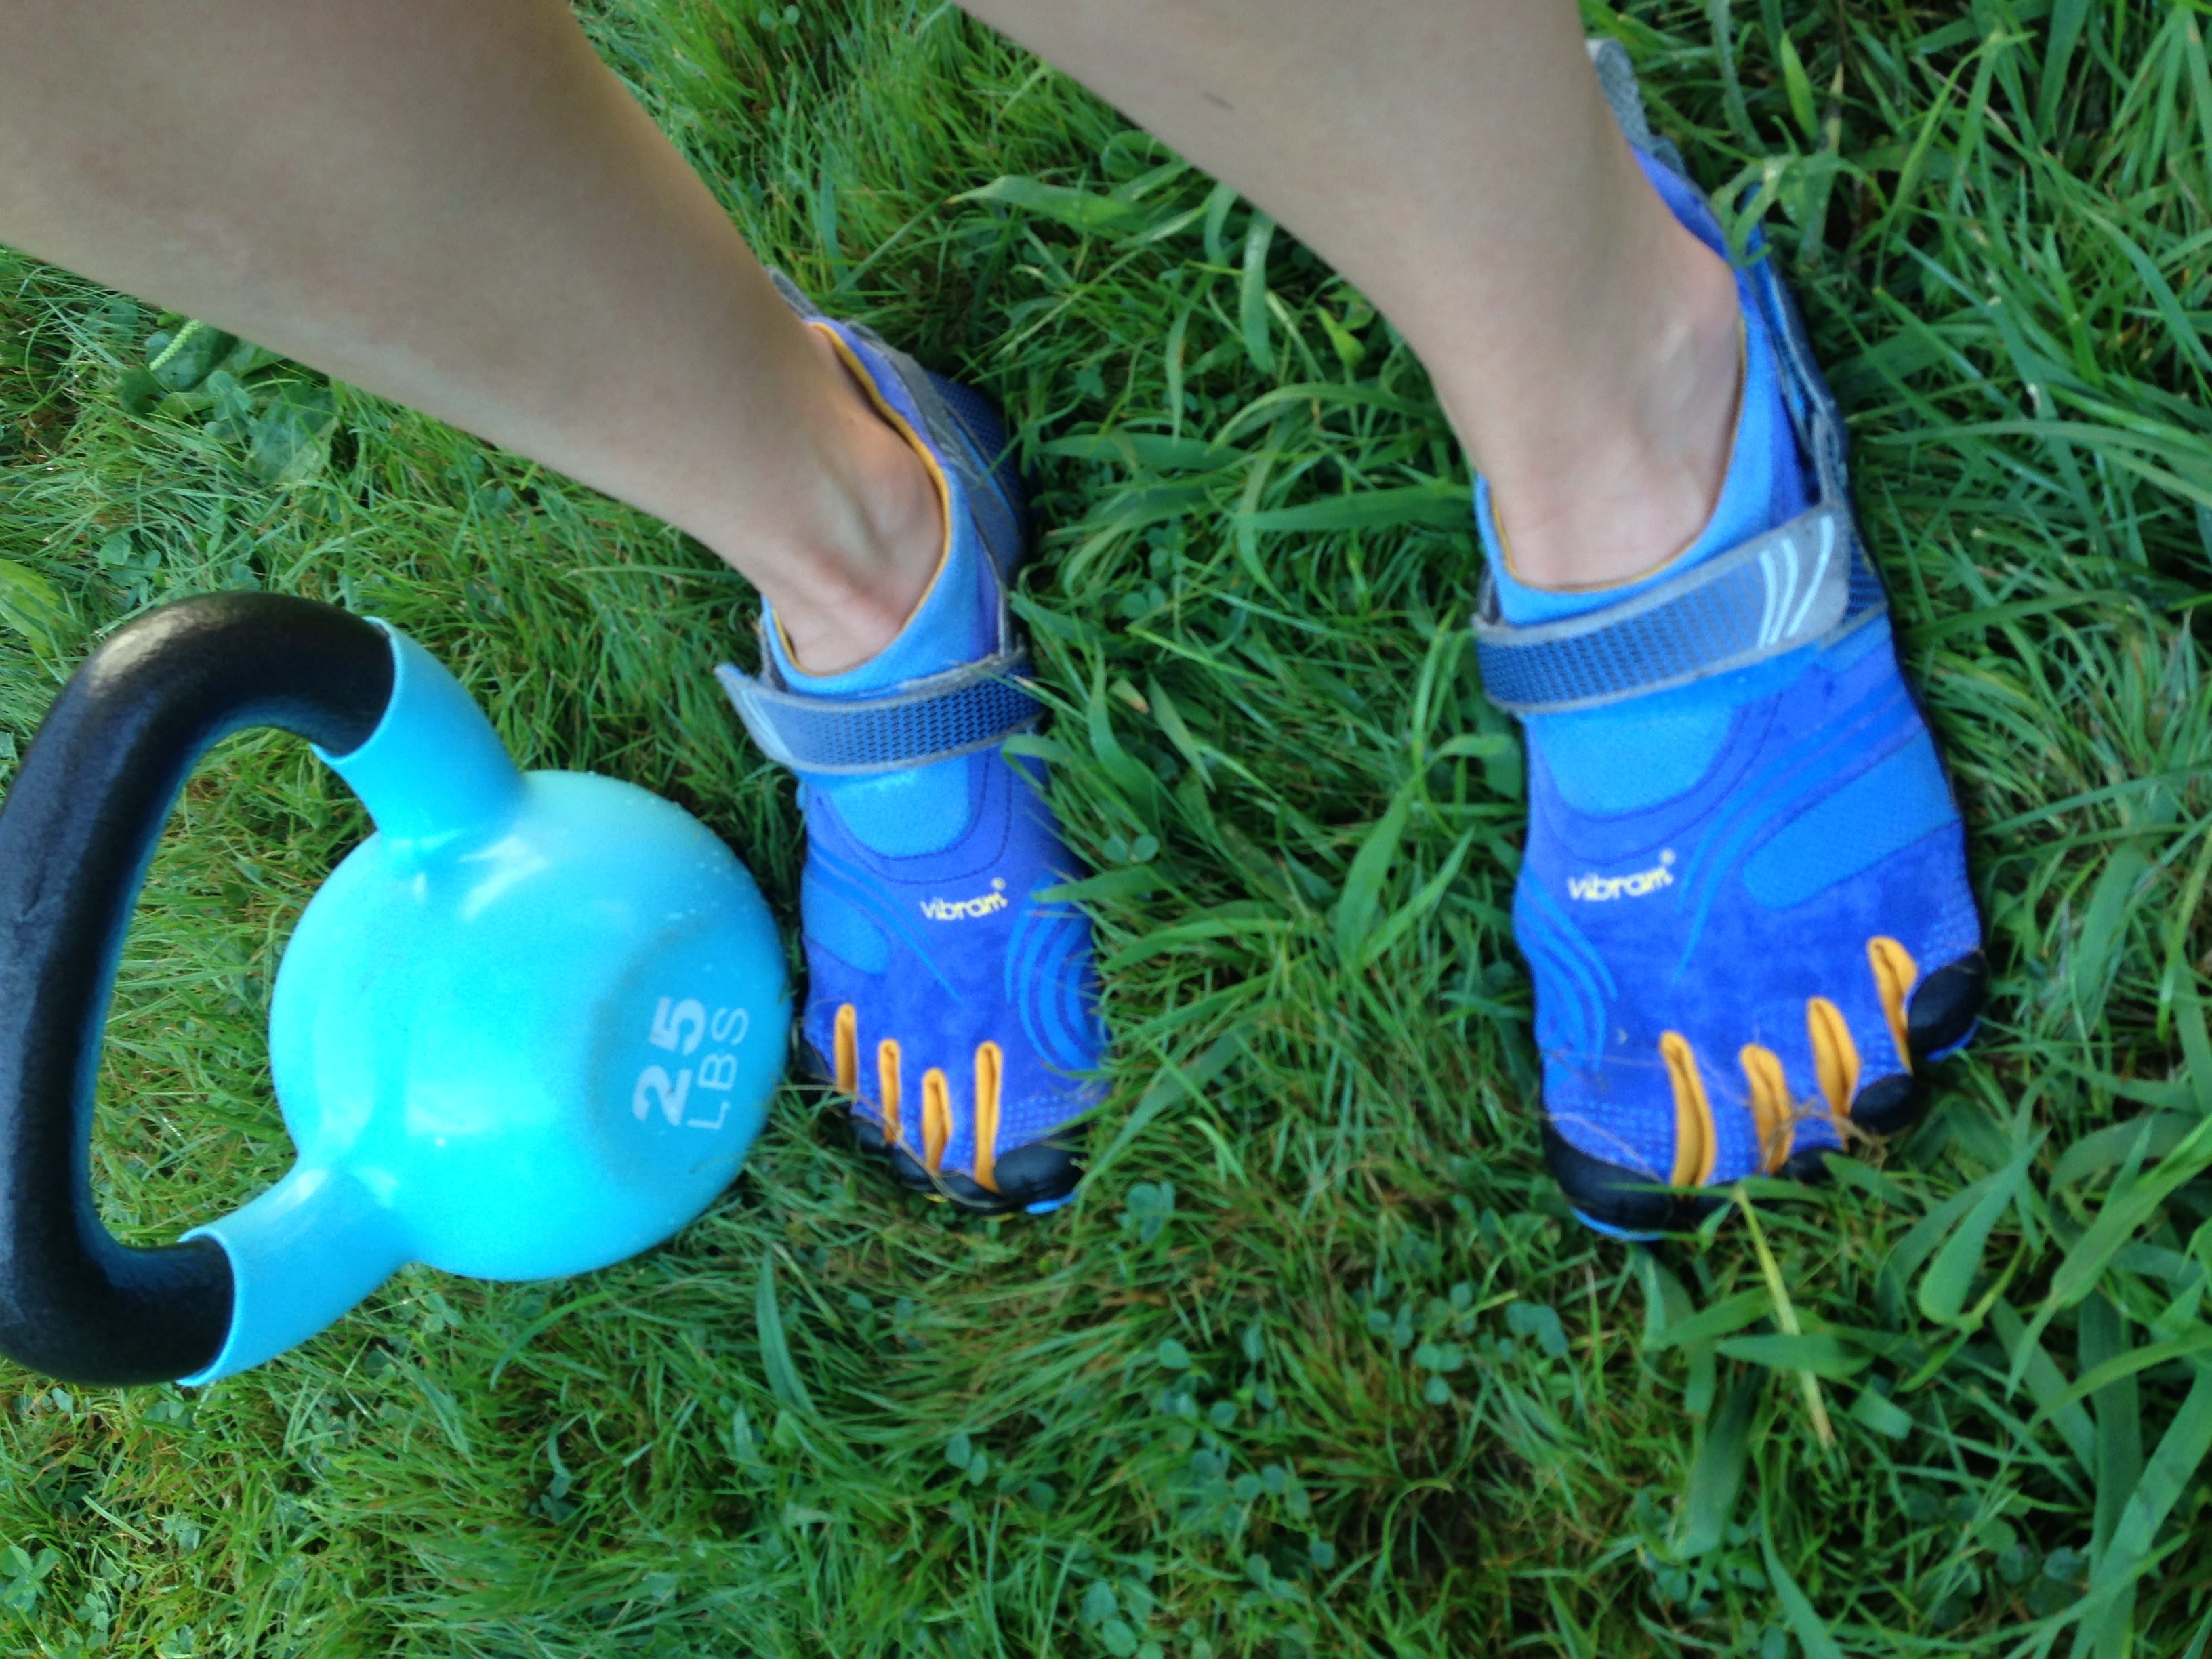 Love Vibram FiveFingers? This could be YOU!